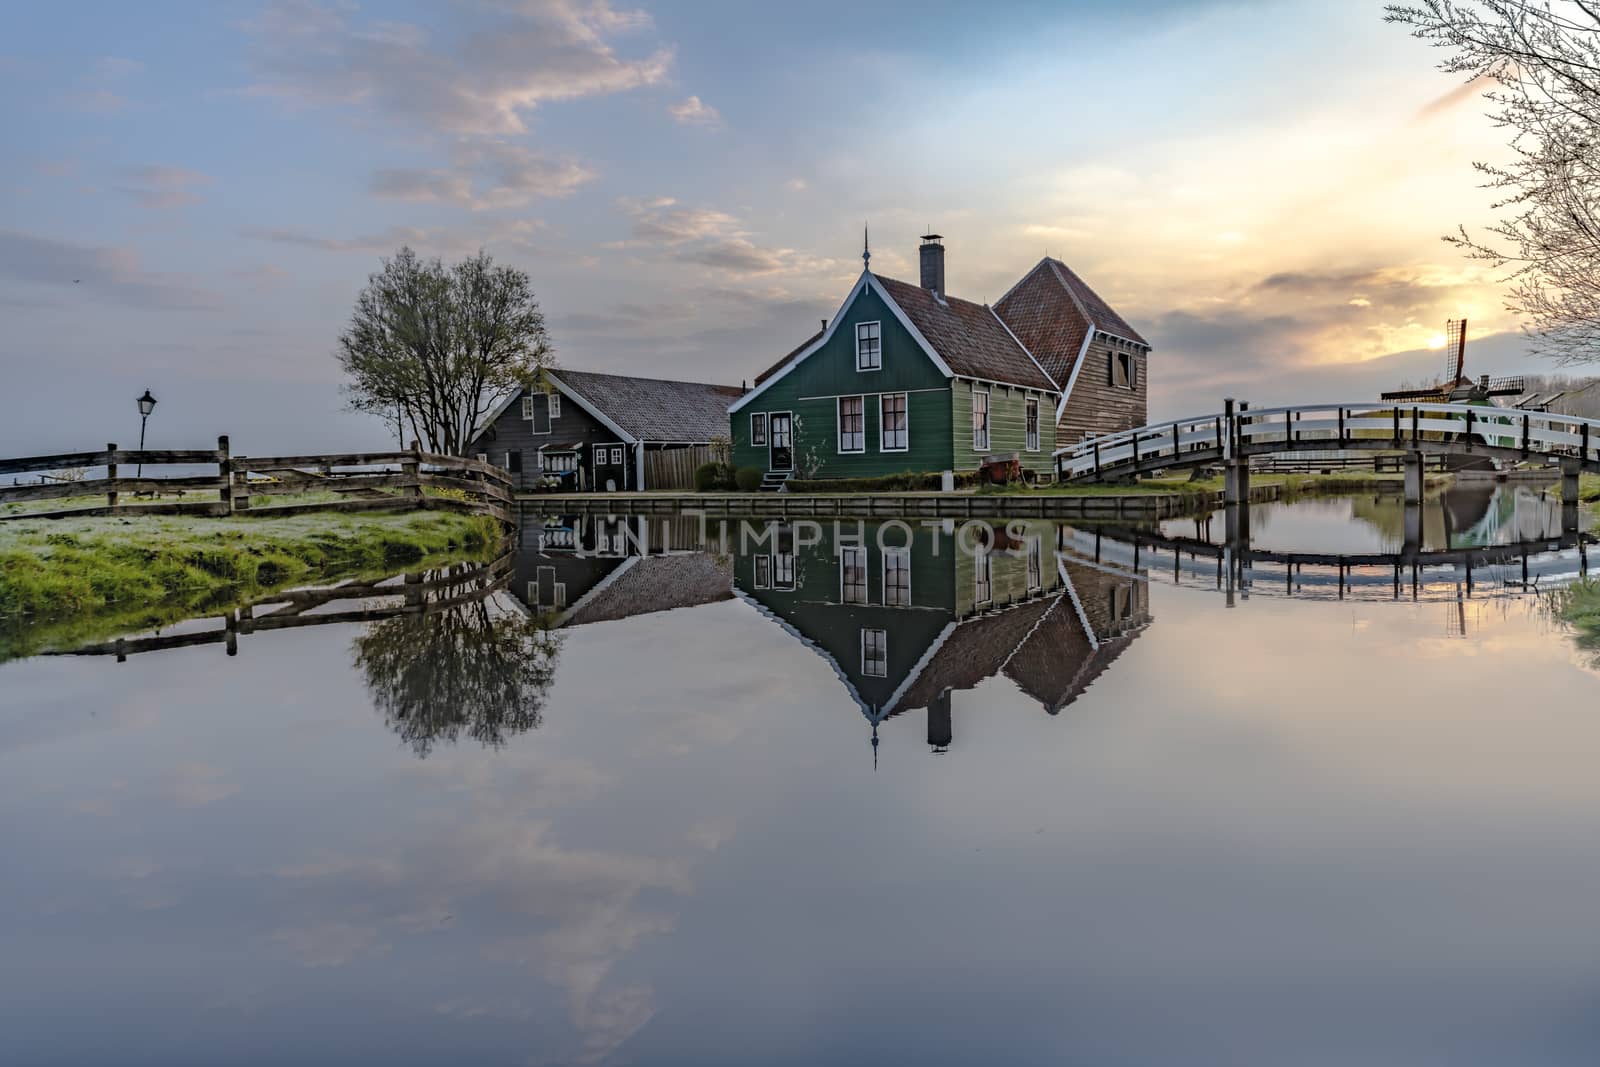 Long exposure of a reflection of the wooden green houses topped with dark orange color roof reflected on the calm water of the canal